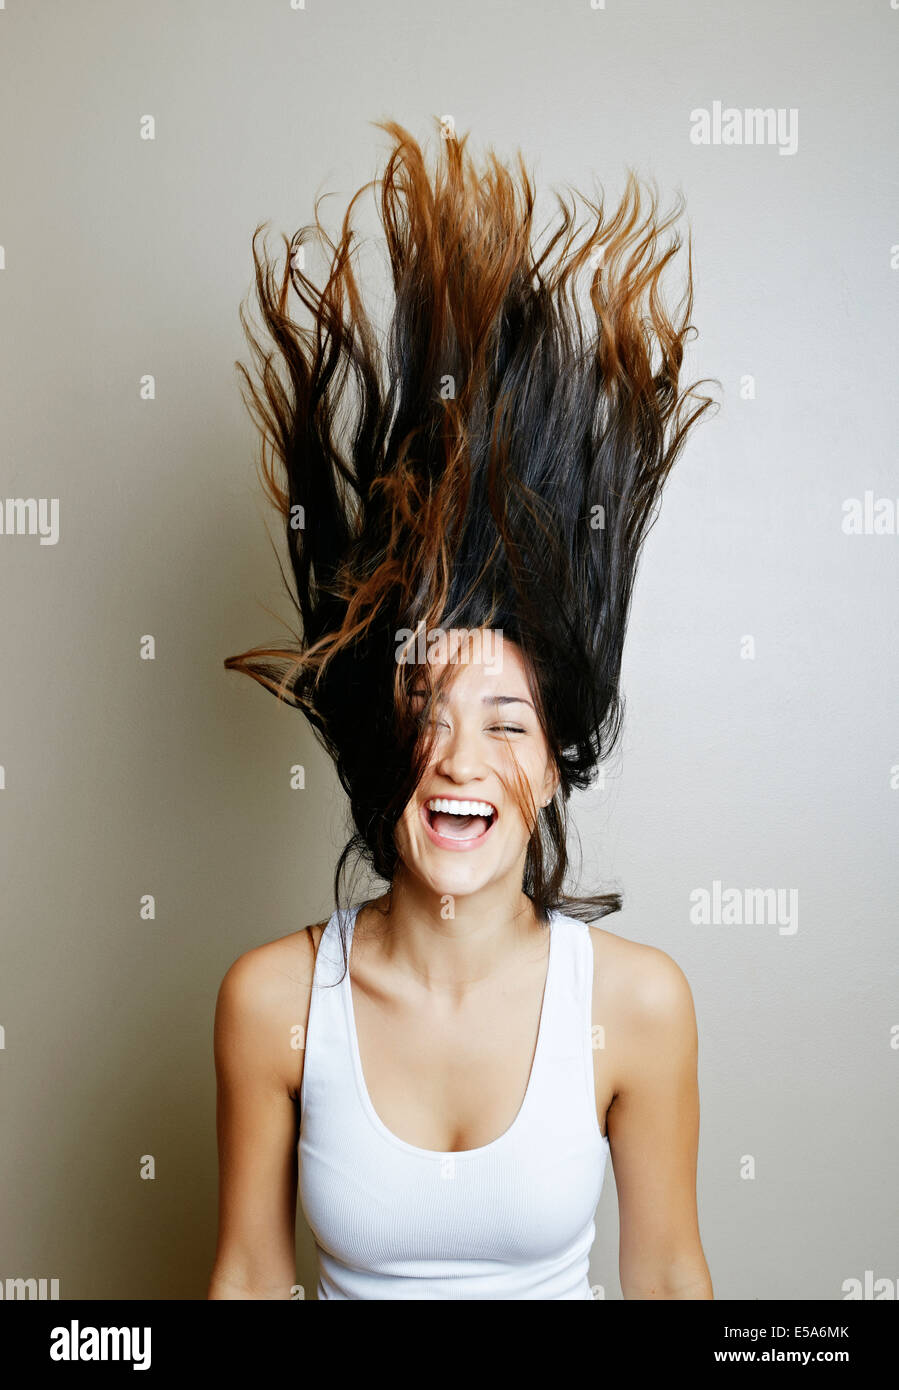 Mixed race woman tossing her hair Stock Photo